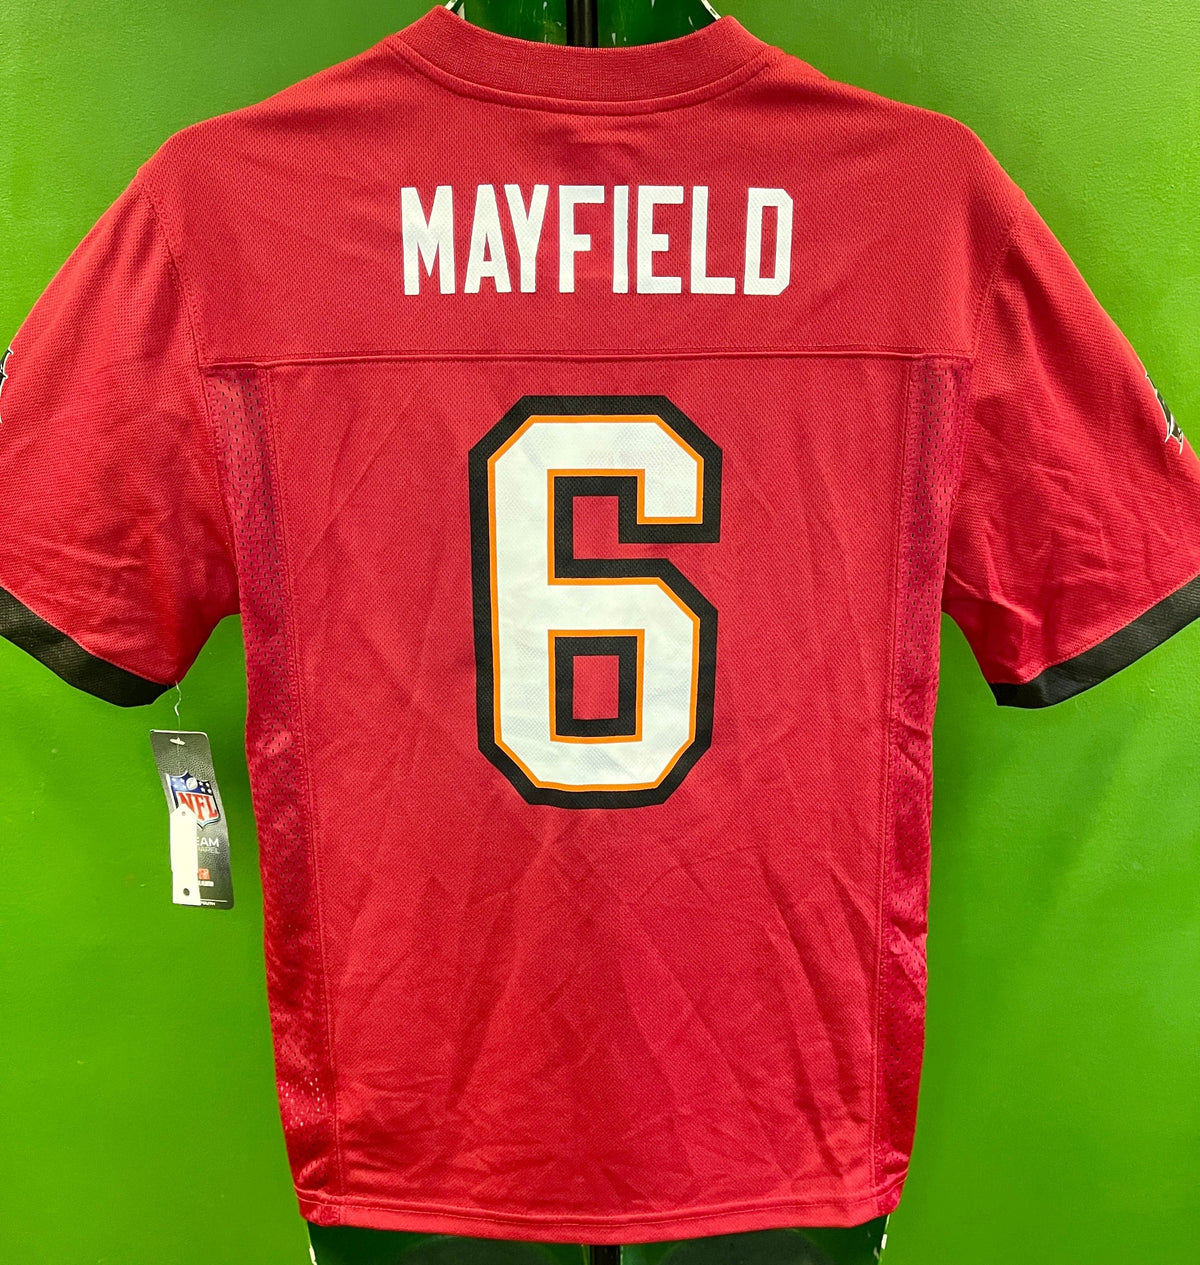 NFL Tampa Bay Buccaneers Baker Mayfield #6 Jersey Youth Medium 10-12 NWT